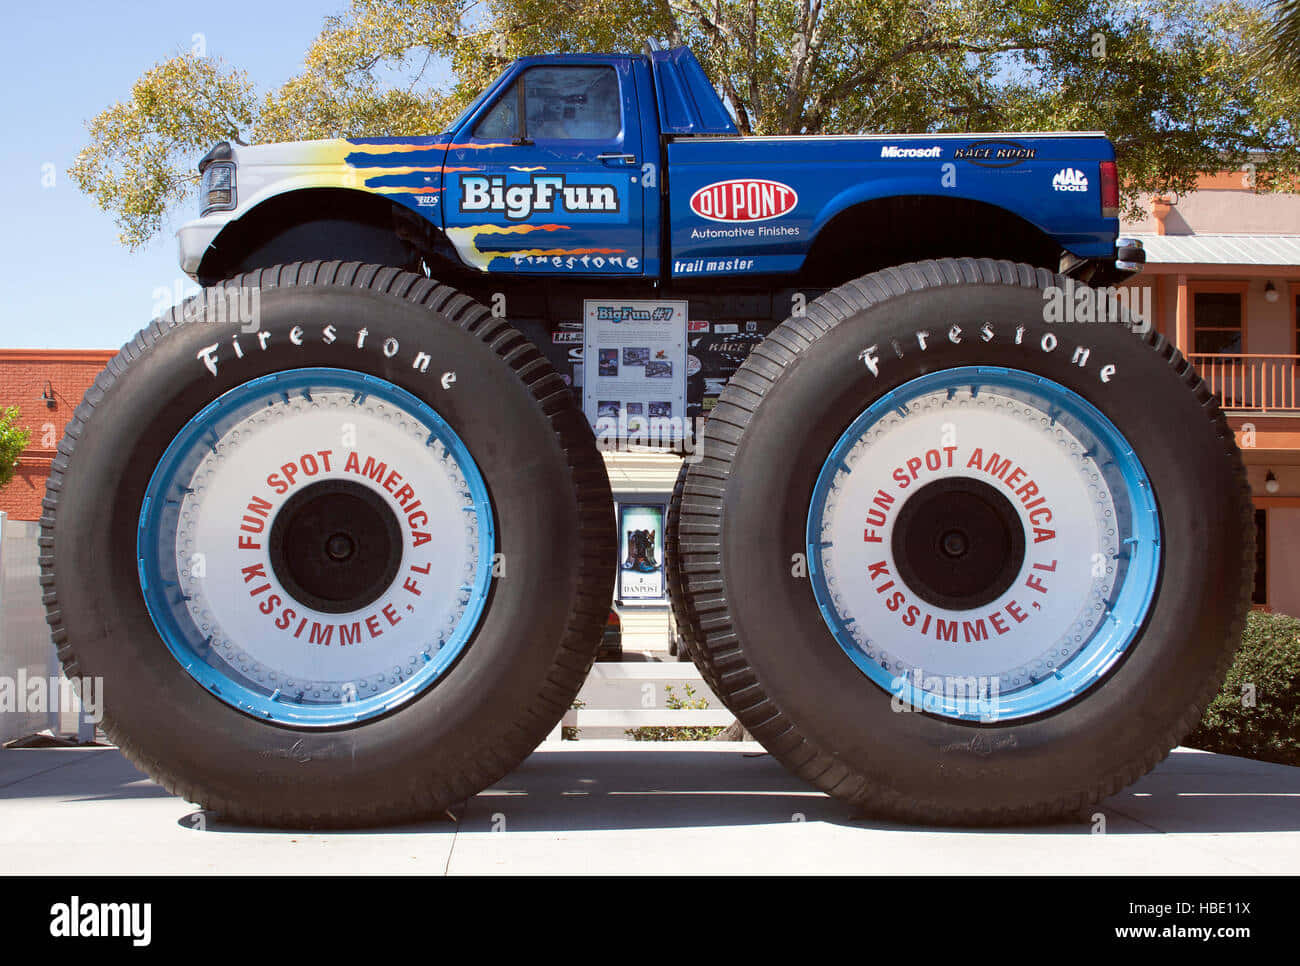 A Monster Truck With Large Tires On Display In A Park - Stock Image